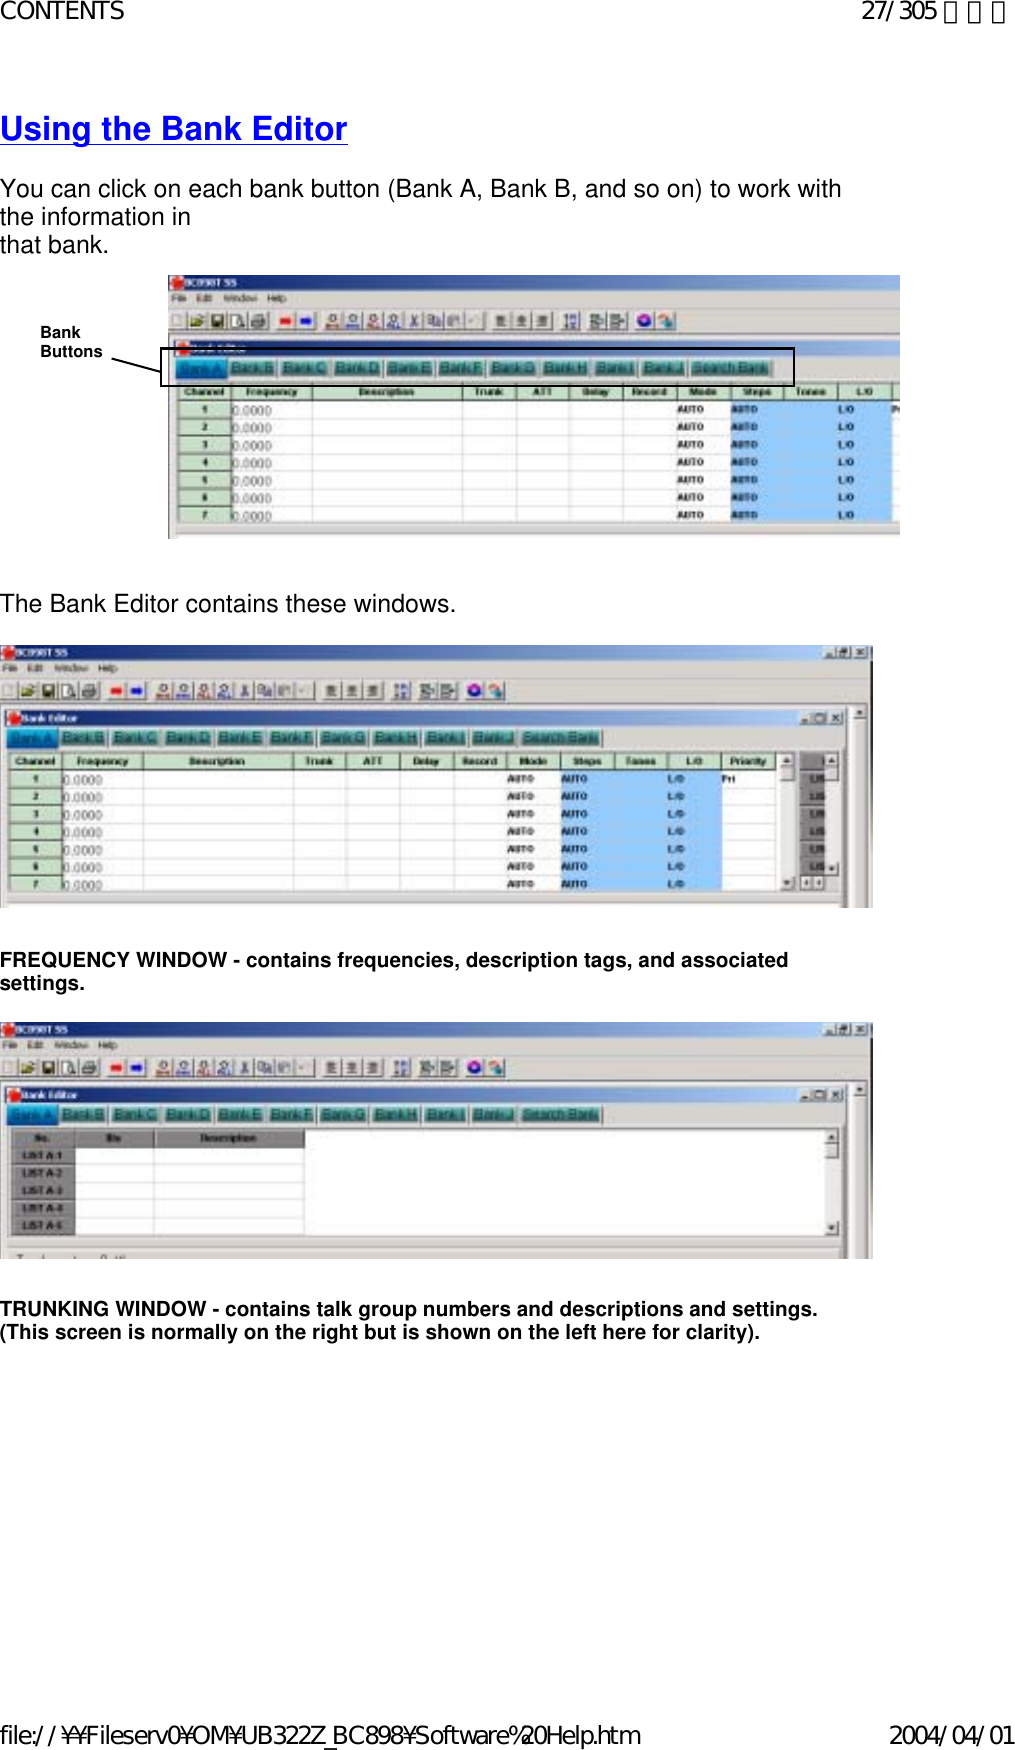 Using the Bank Editor   You can click on each bank button (Bank A, Bank B, and so on) to work with the information in  that bank.                                                 The Bank Editor contains these windows.                        FREQUENCY WINDOW - contains frequencies, description tags, and associated settings.                       TRUNKING WINDOW - contains talk group numbers and descriptions and settings.  (This screen is normally on the right but is shown on the left here for clarity).                     Bank  Buttons 27/305 ページCONTENTS2004/04/01file://¥¥Fileserv0¥OM¥UB322Z_BC898¥Software%20Help.htm